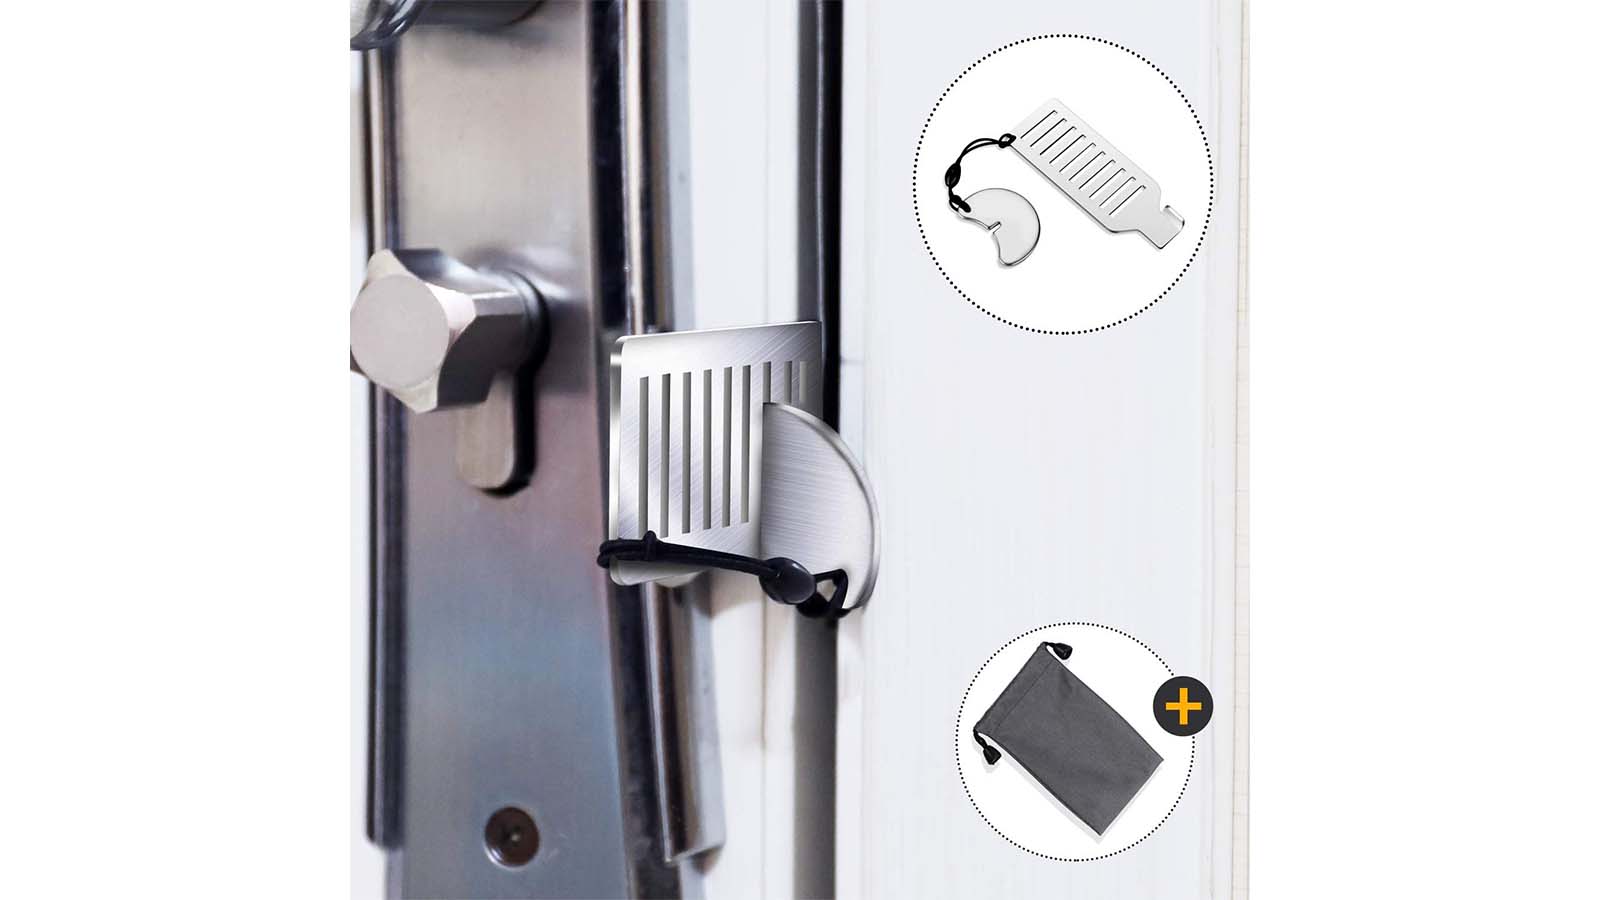 AceMining Portable Door Lock Home Security Door Lock Travel Lockdown Locks  for Additional Safety and Privacy Perfect for Traveling Hotel Home